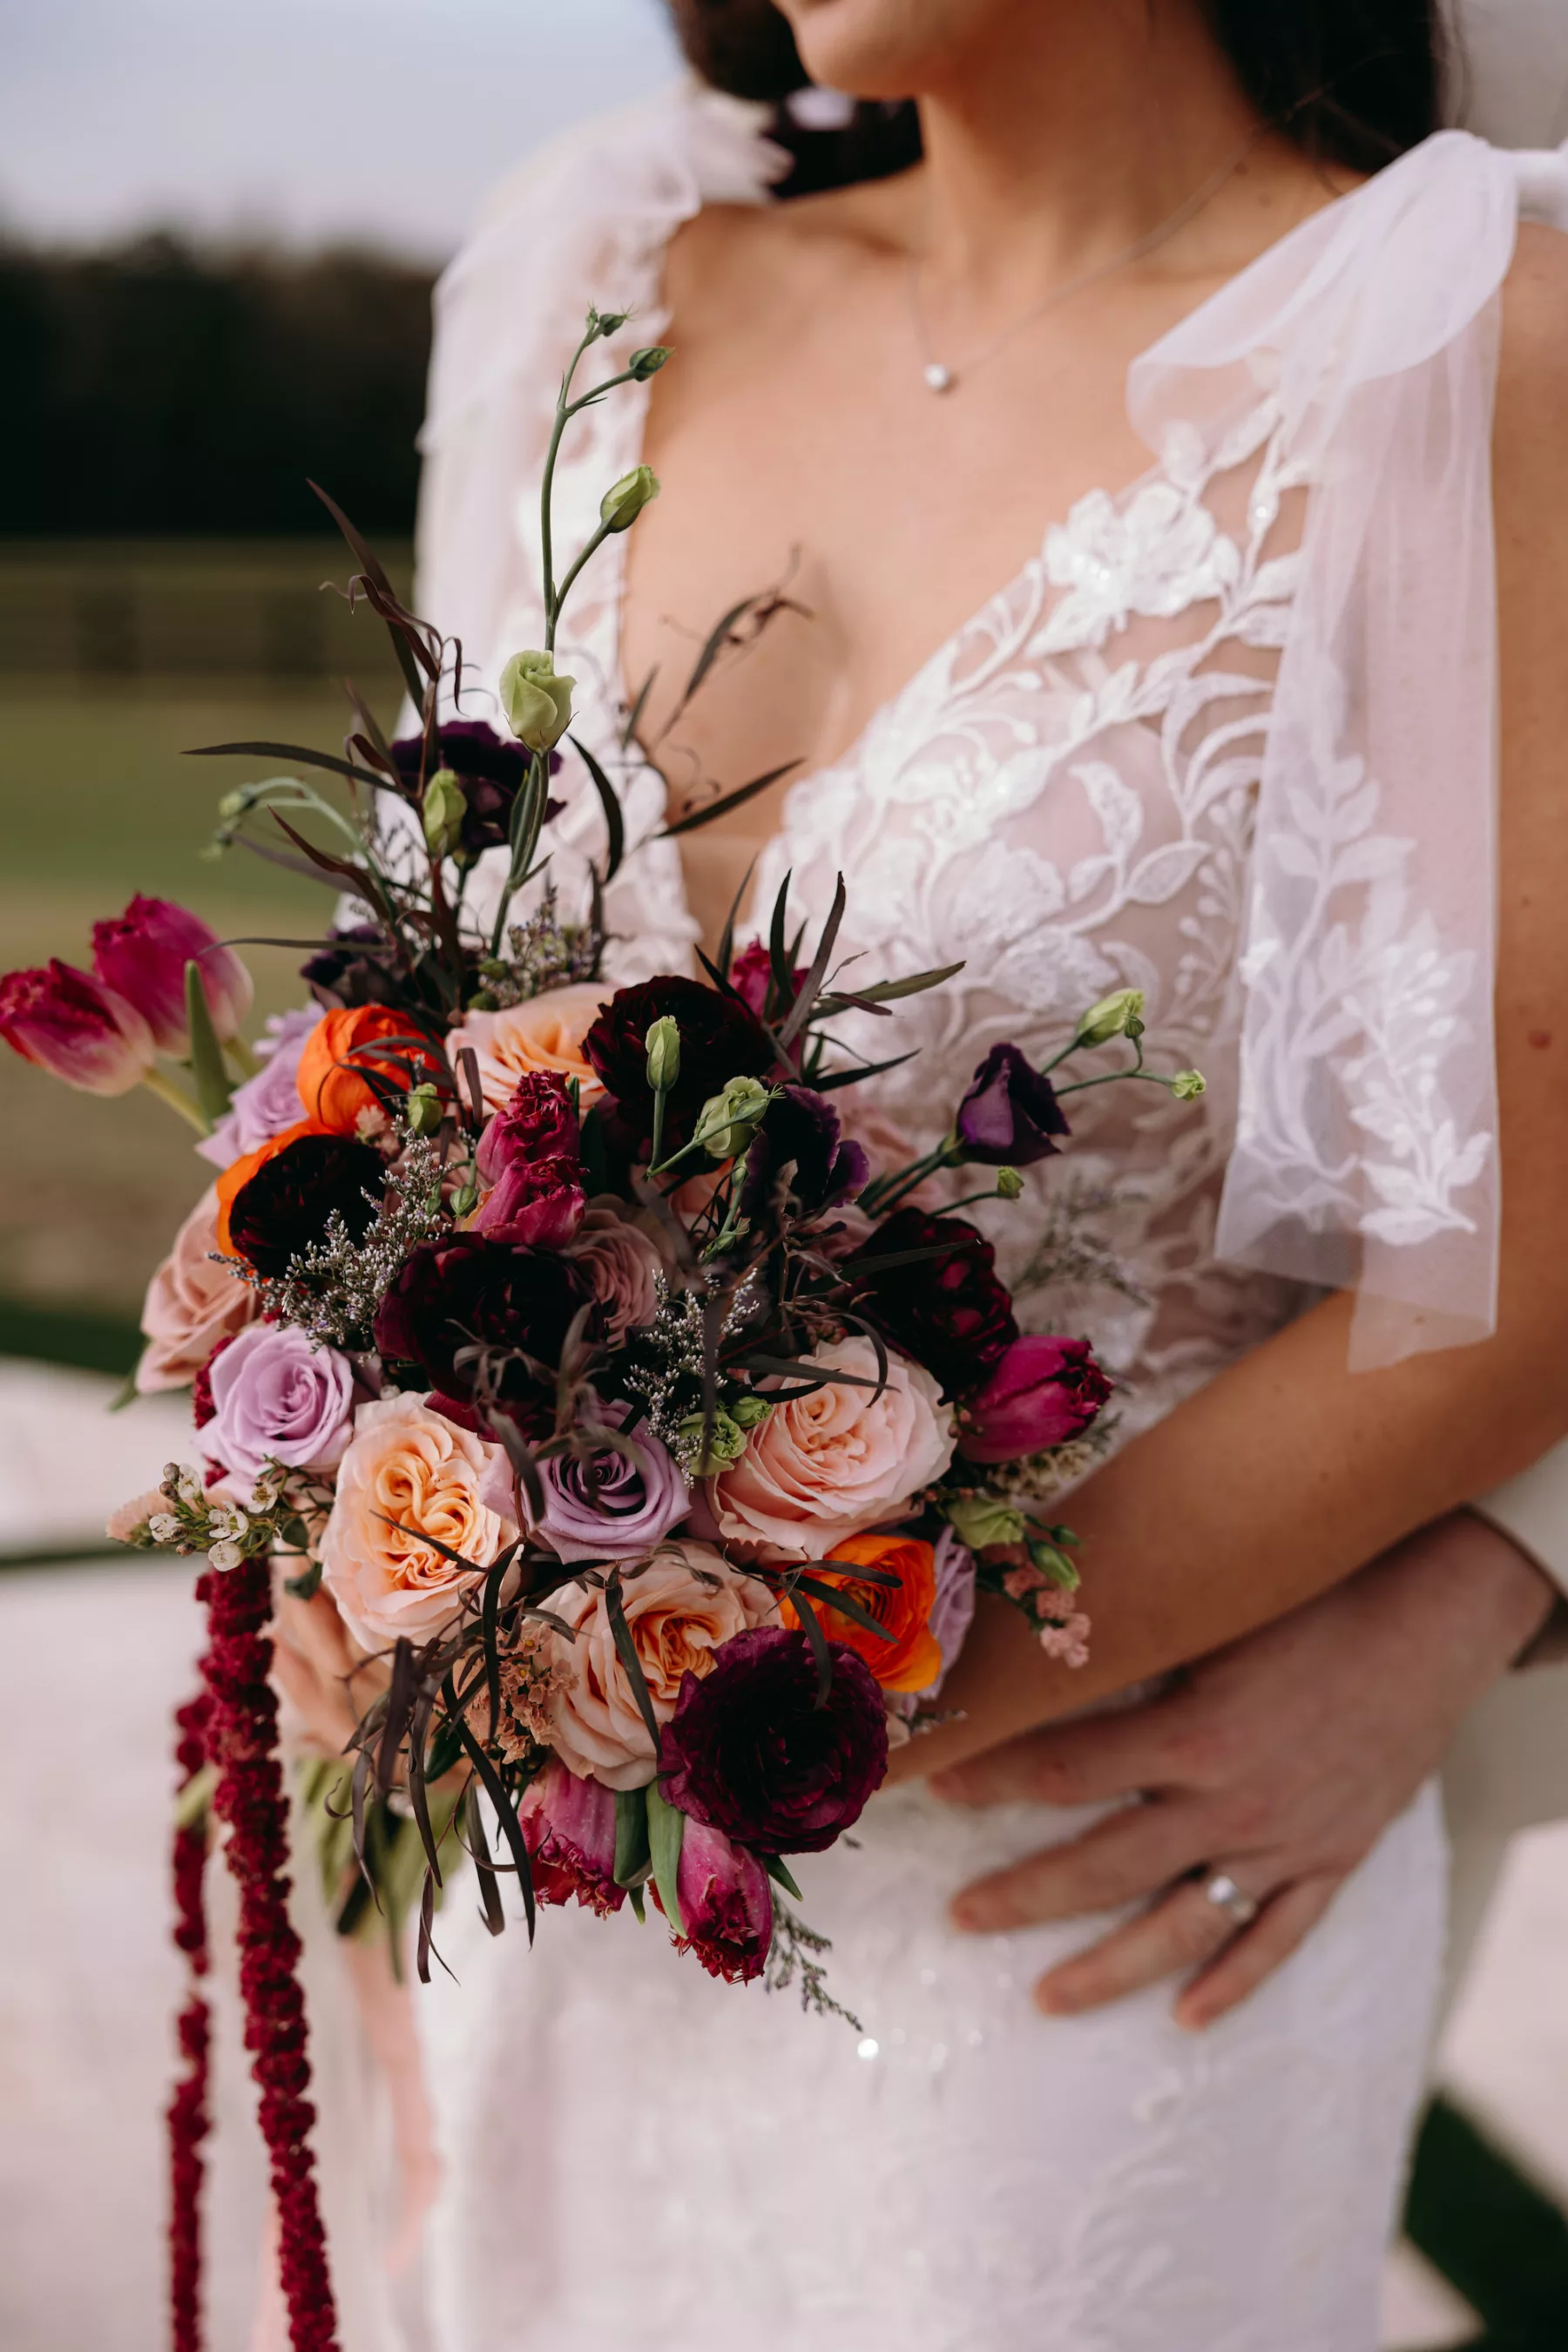 Whimsical Fall Purple and Orange Roses, Brown Amaranthus, Pink Tulips, Wax Flowers, and Greenery Wedding Bouquet | White Lace Mermaid Wedding Dress with Tulle Bow Straps Inspiration | Tampa Bay Florist Save The Date Florida